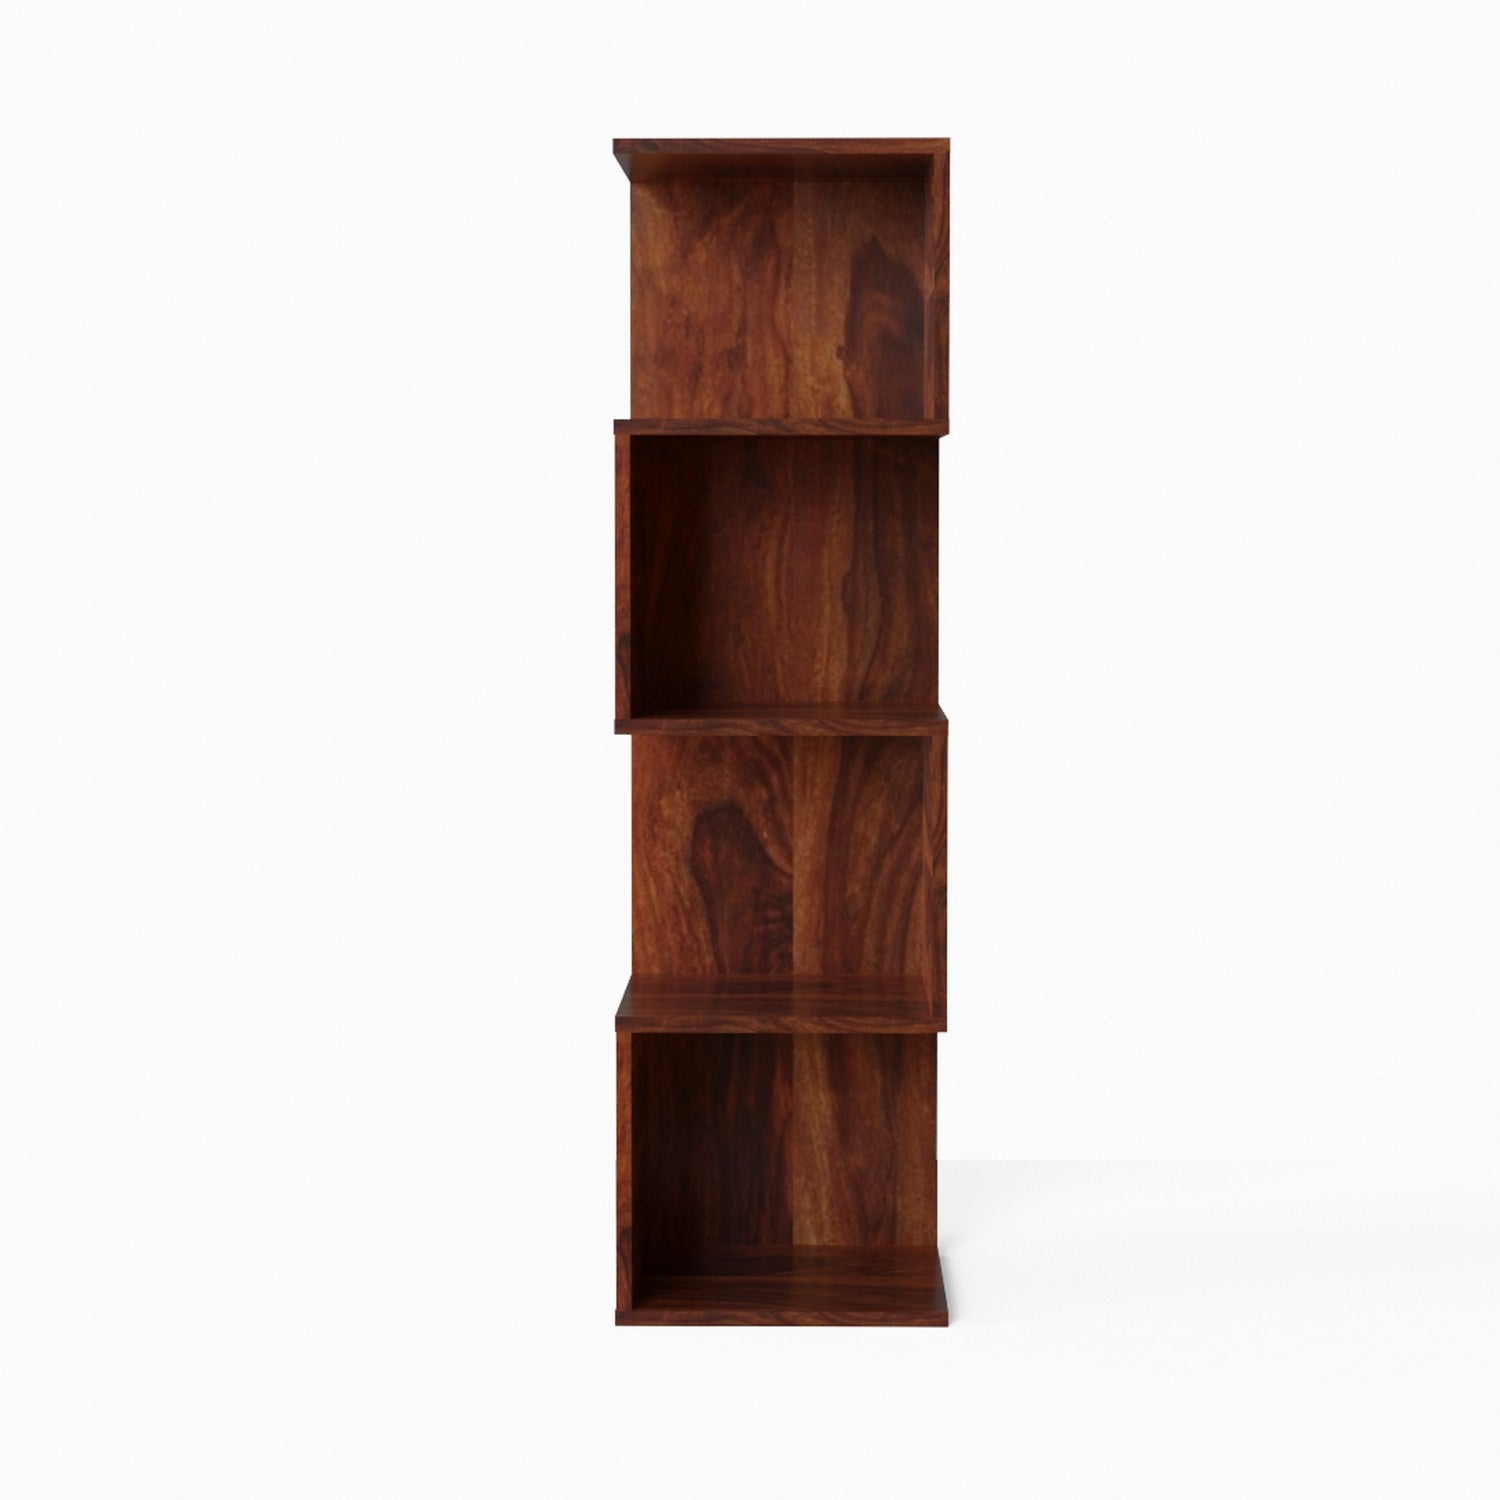 Revista Solid Sheesham Wood Study Table With Bookshelf (Natural Finish)